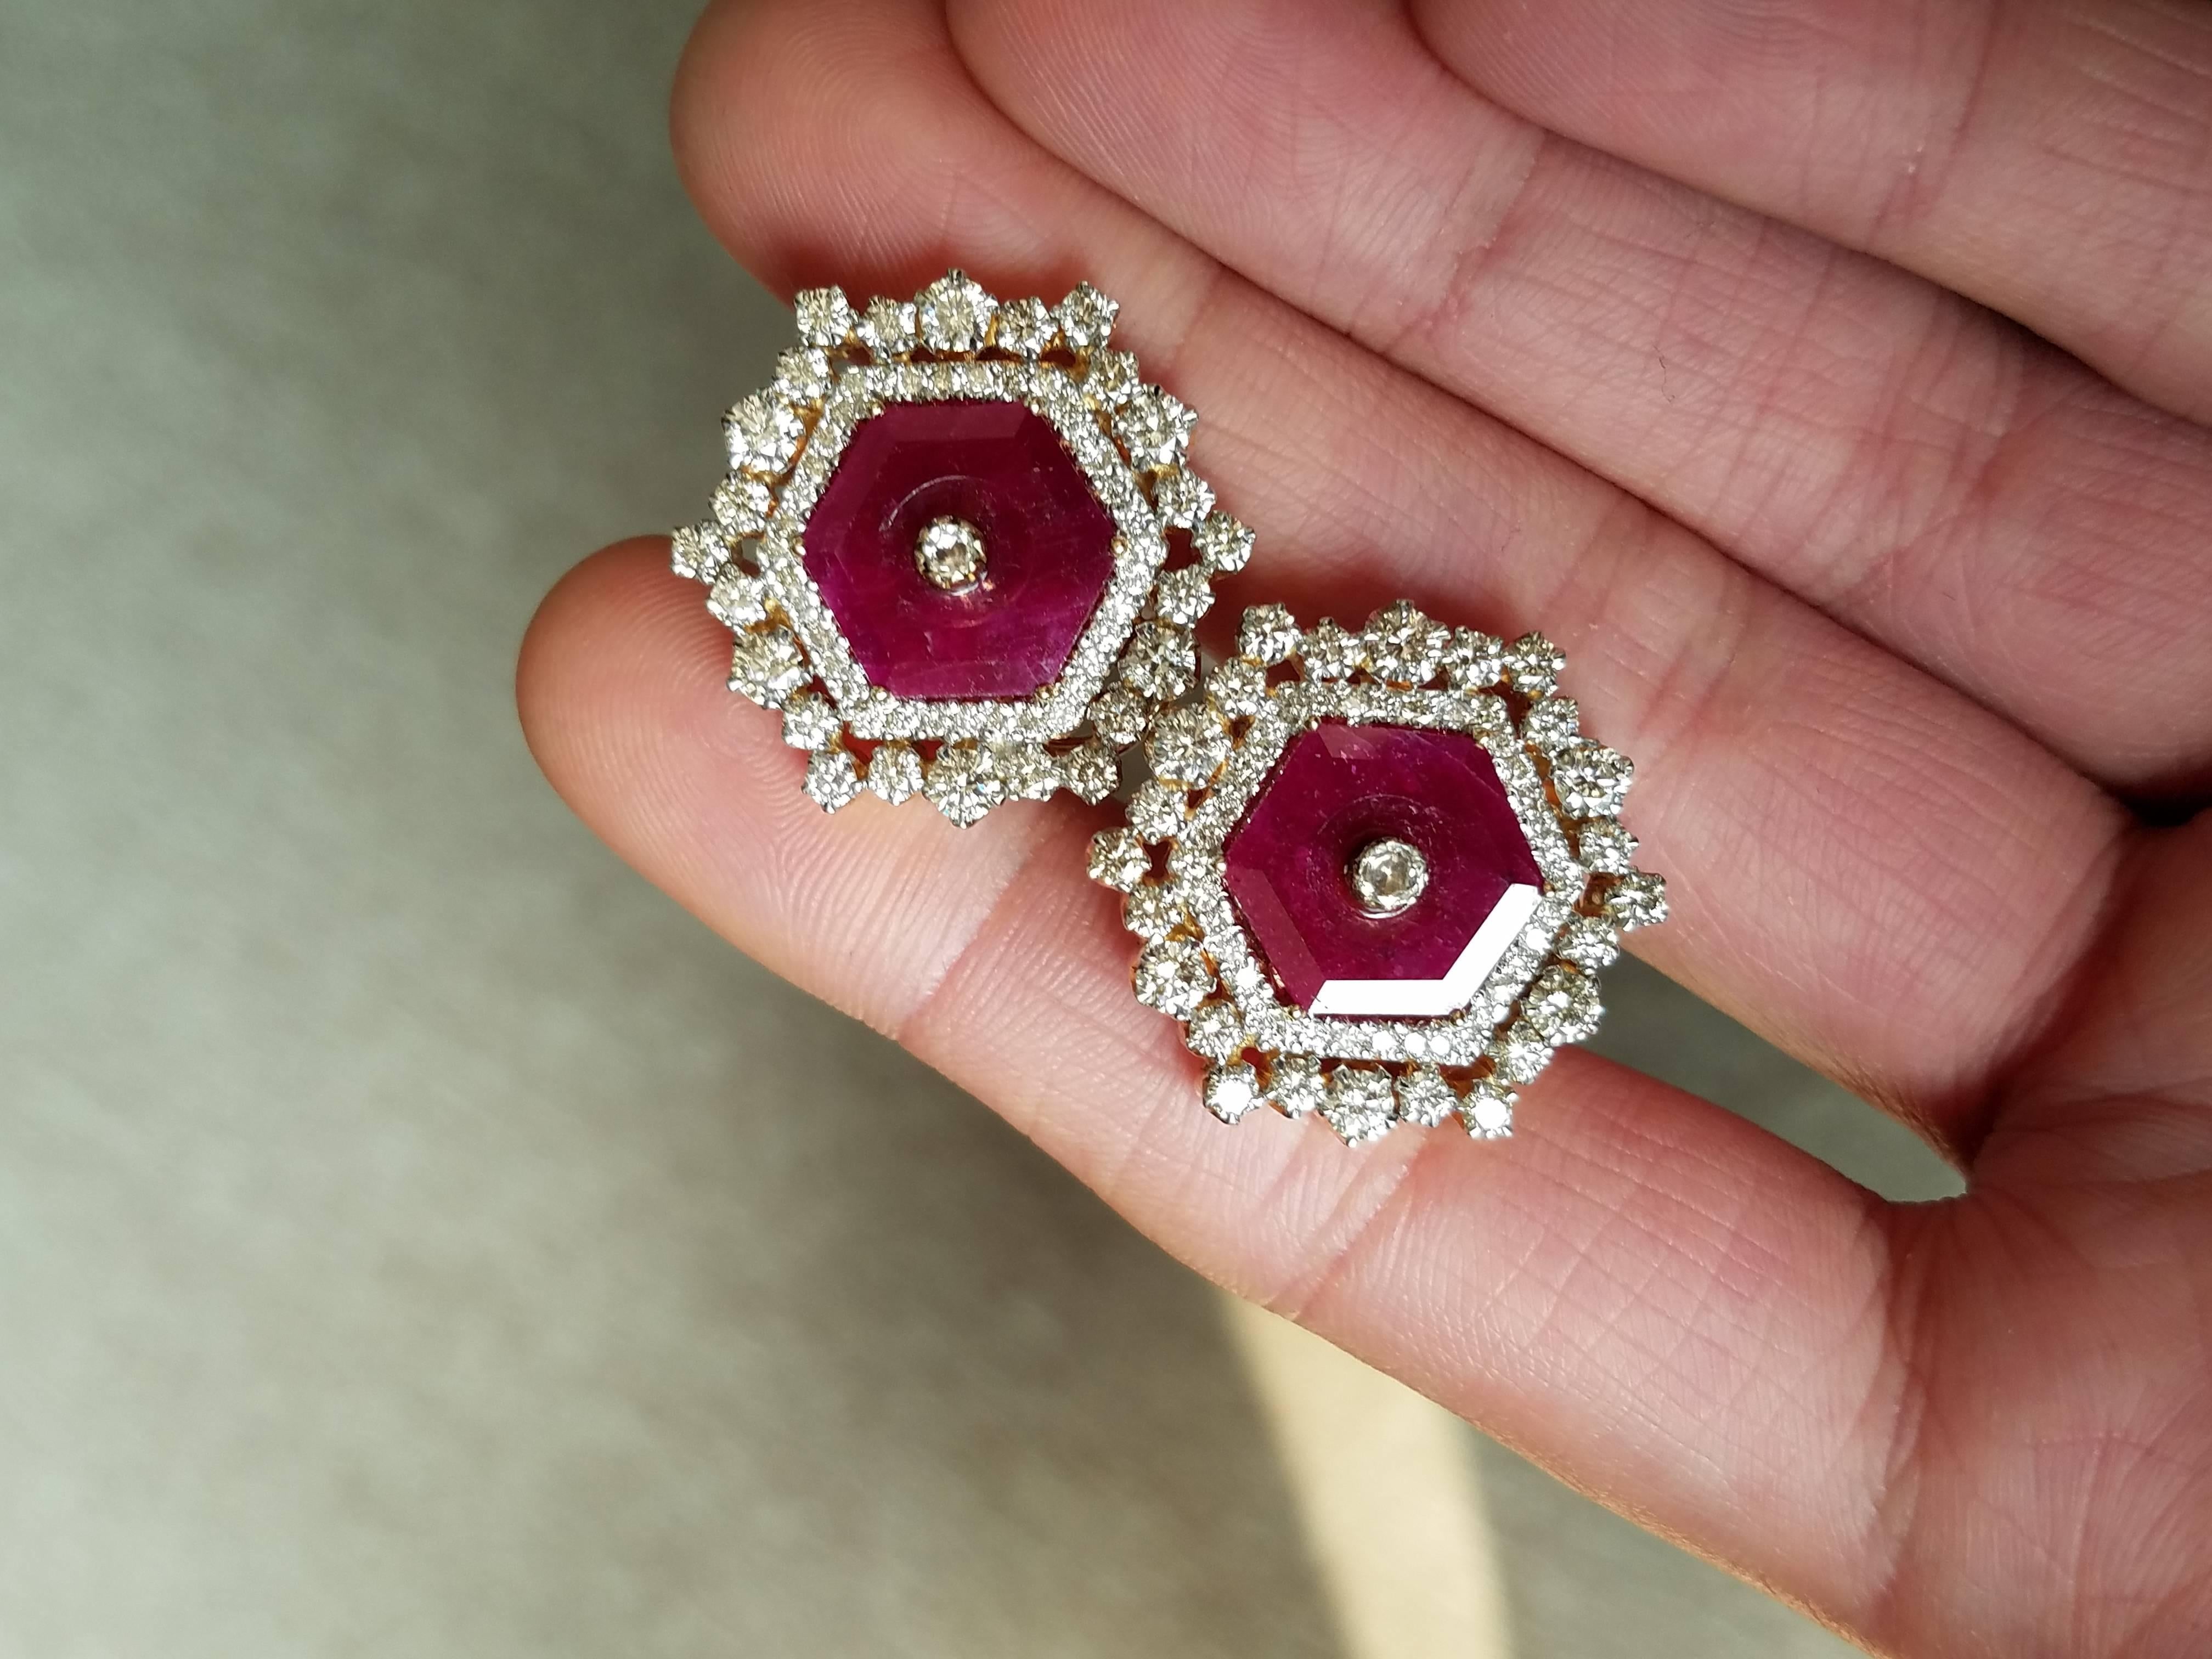 A beautiful pair of earrings, with a unique design which can be worn on many different occasions. 

Stone Details:  
Stone: Ruby
Cut: Hexagon
Carat Weight: 7.25 Carat  

Diamond Details: 
Cut: Brilliant
Total Carat Weight: 3.66 carat 
Quality: VS/SI